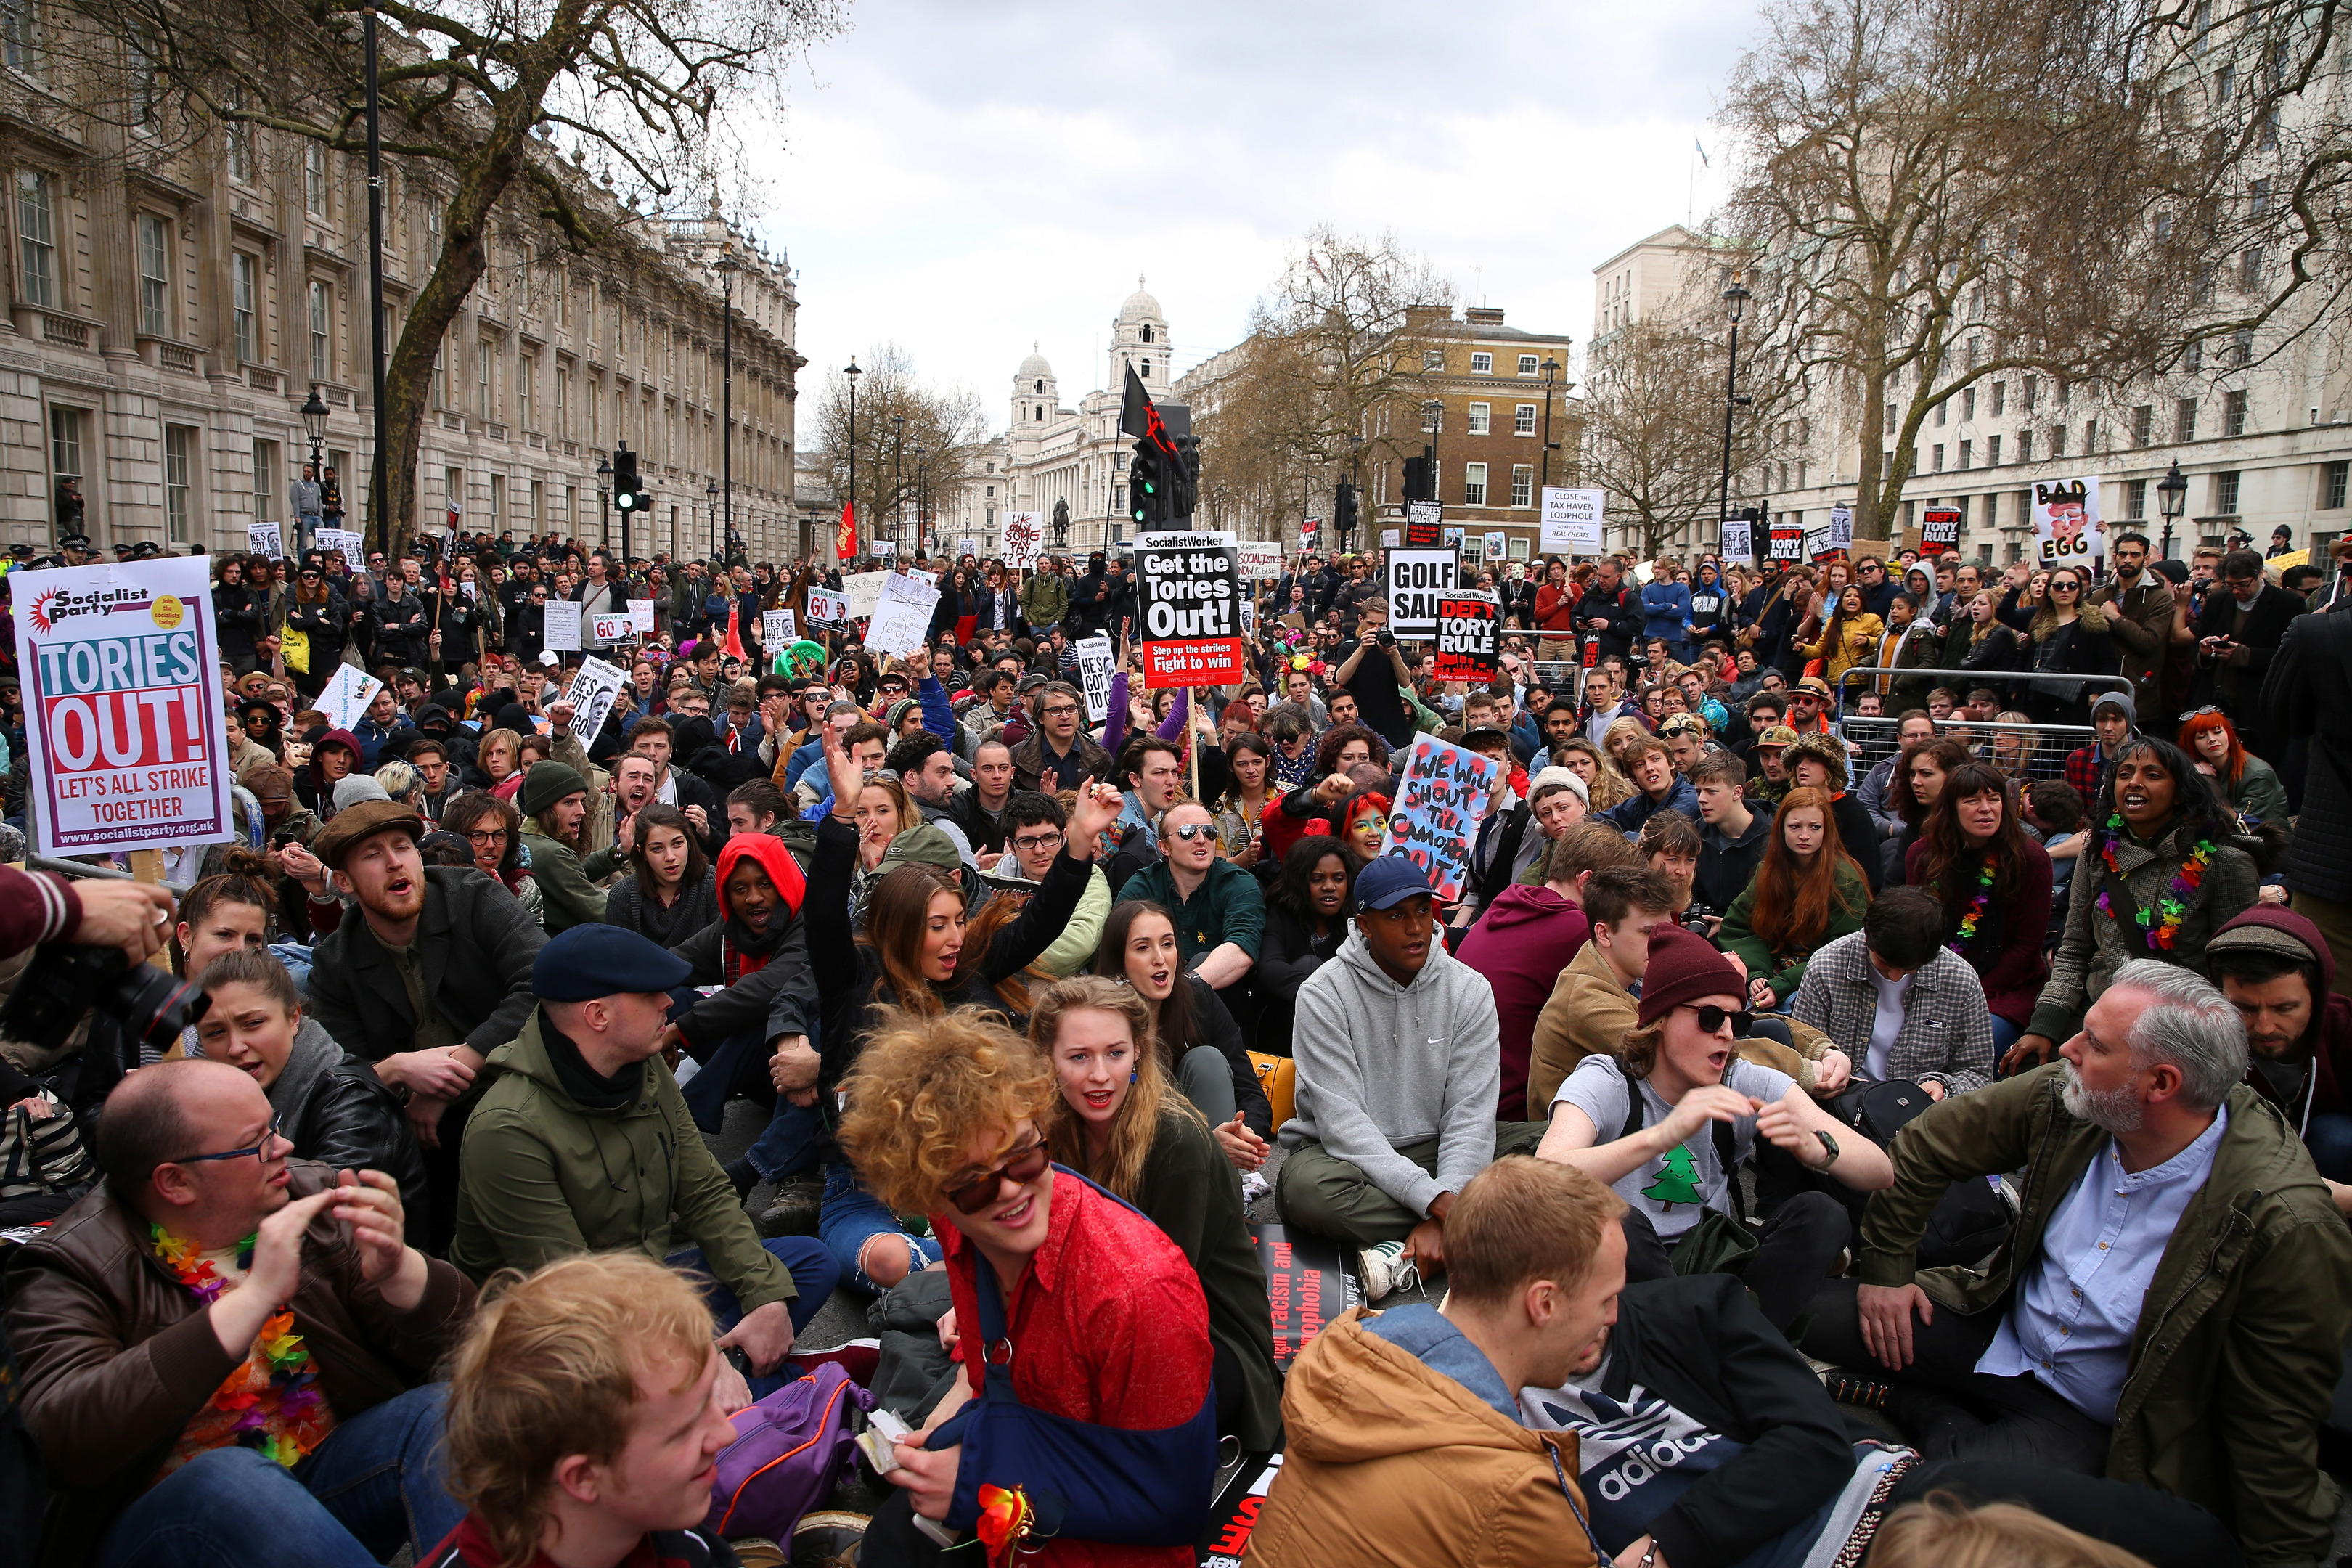 Demonstrators sit down in protest outside Downing Street (Dan Kitwood/Getty Images)